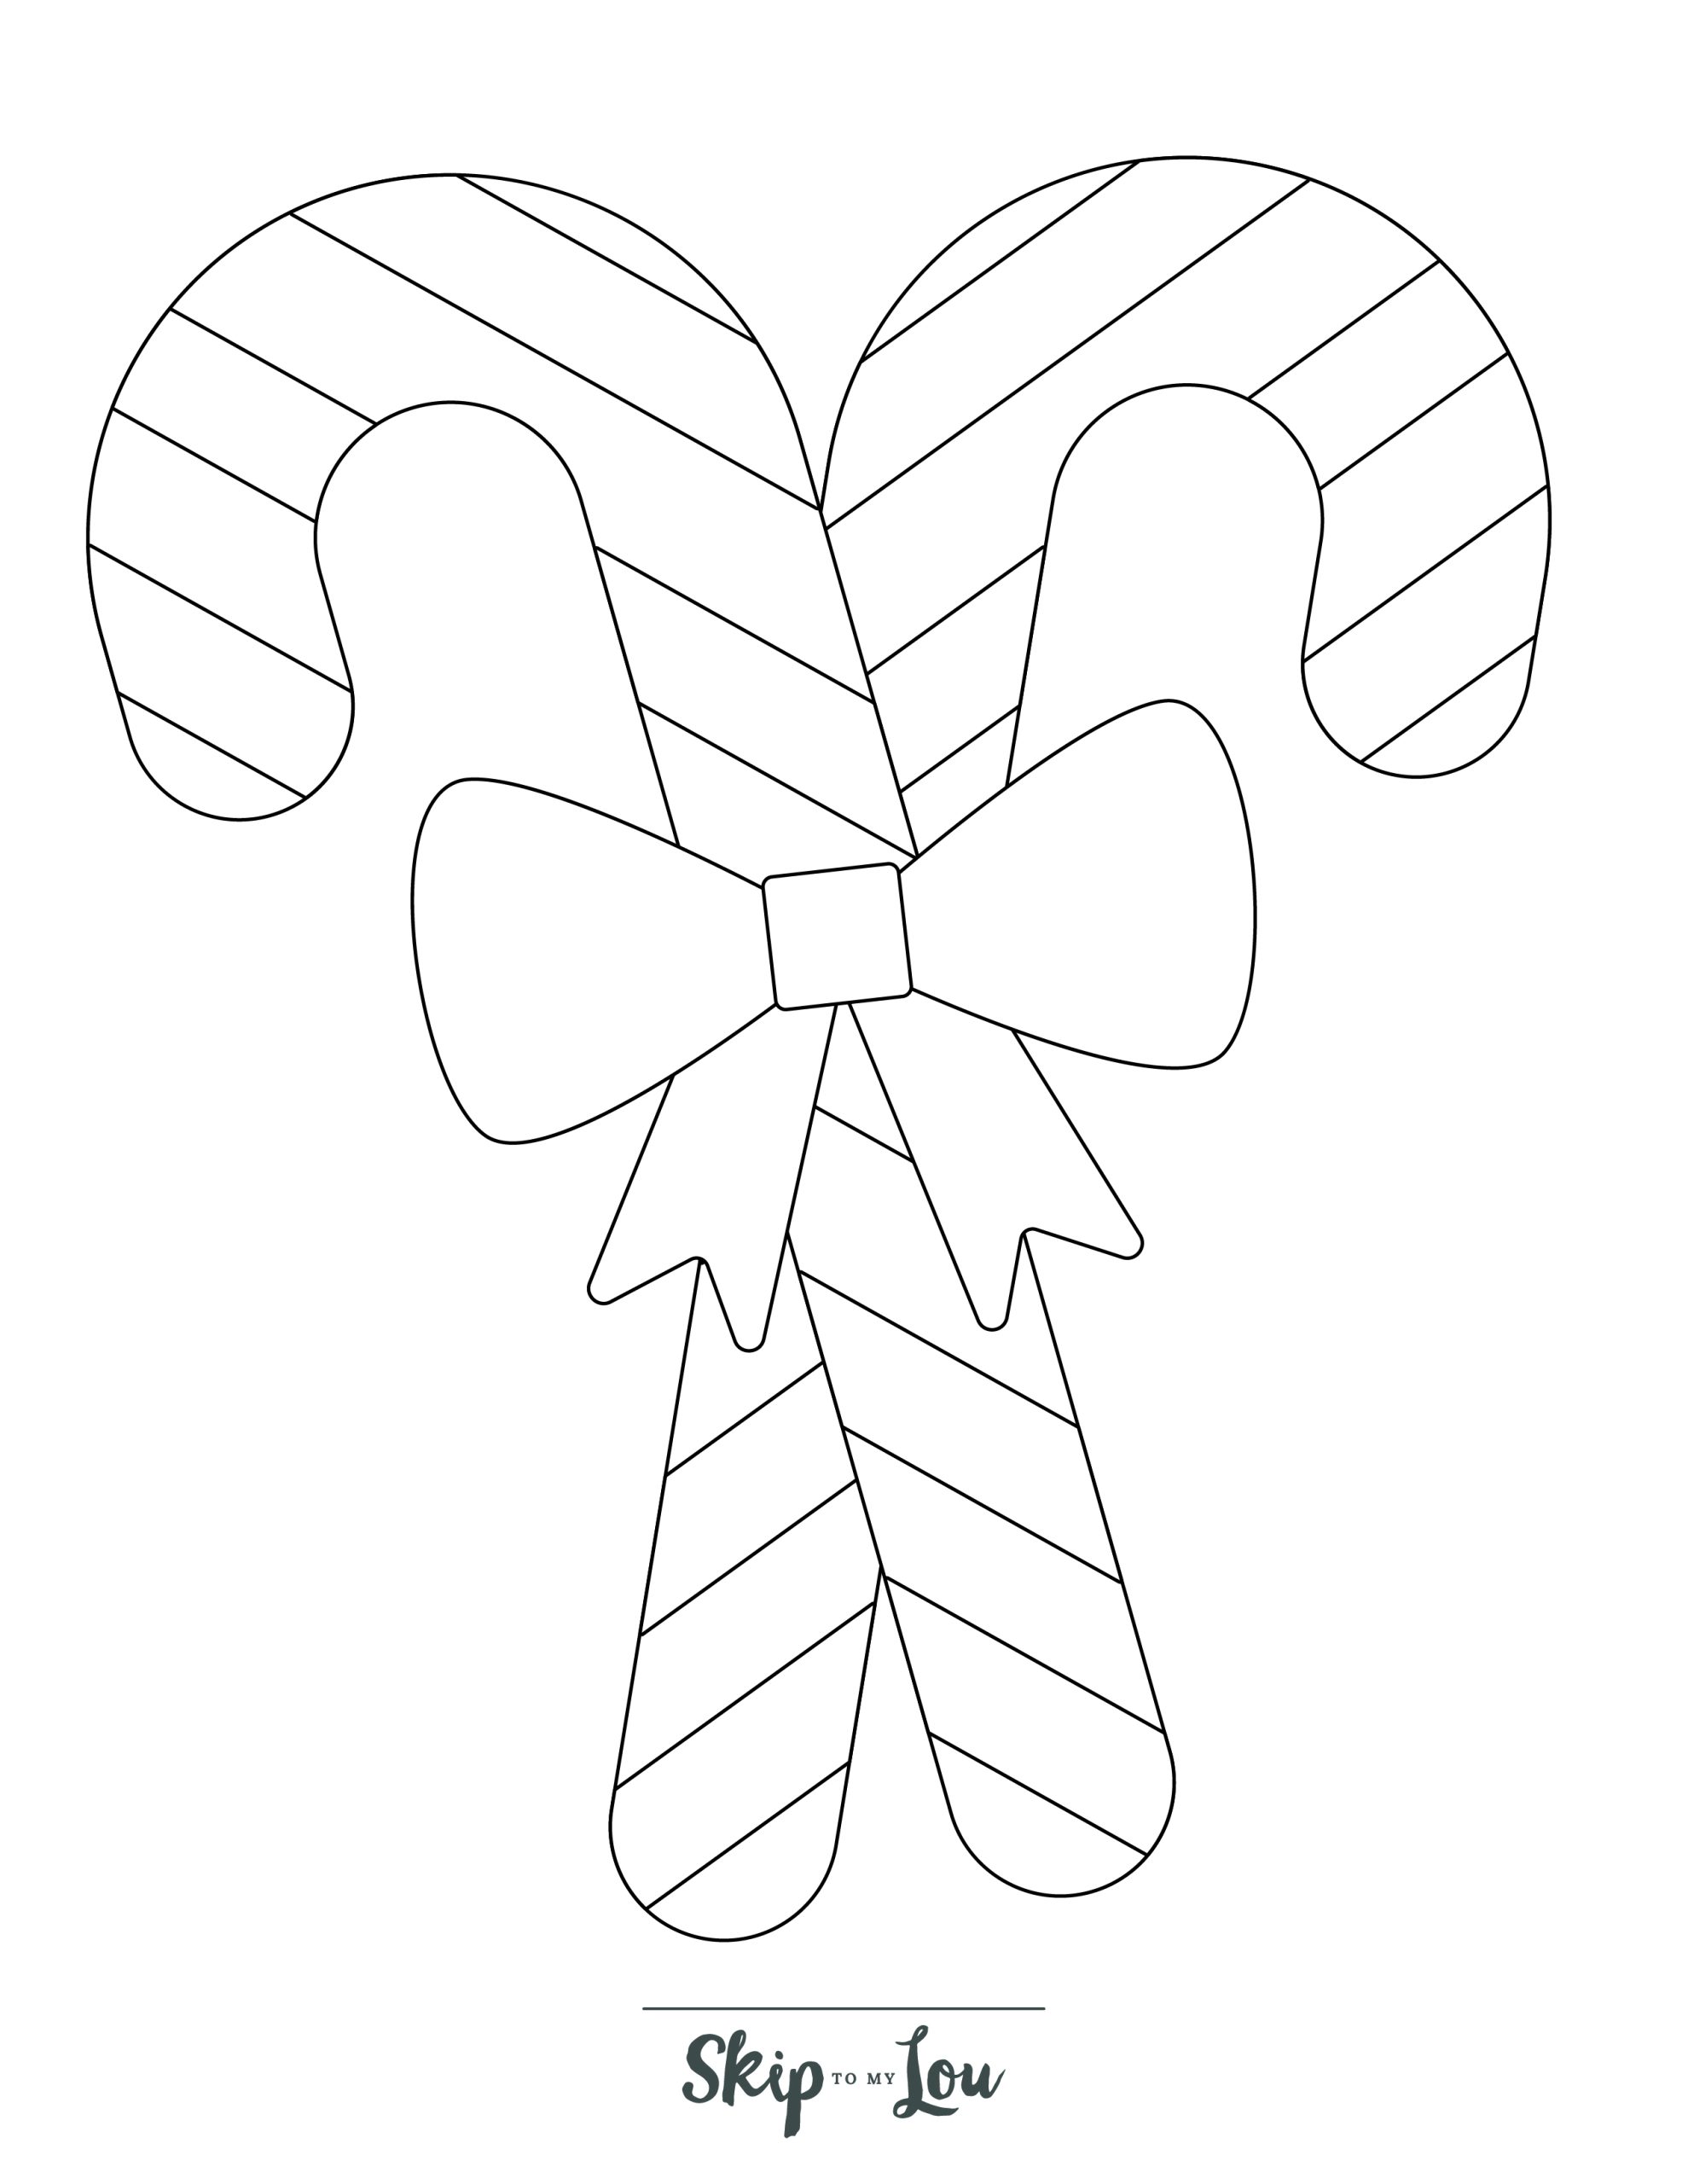 Holiday Coloring Page 2 - Line drawing of candy canes 